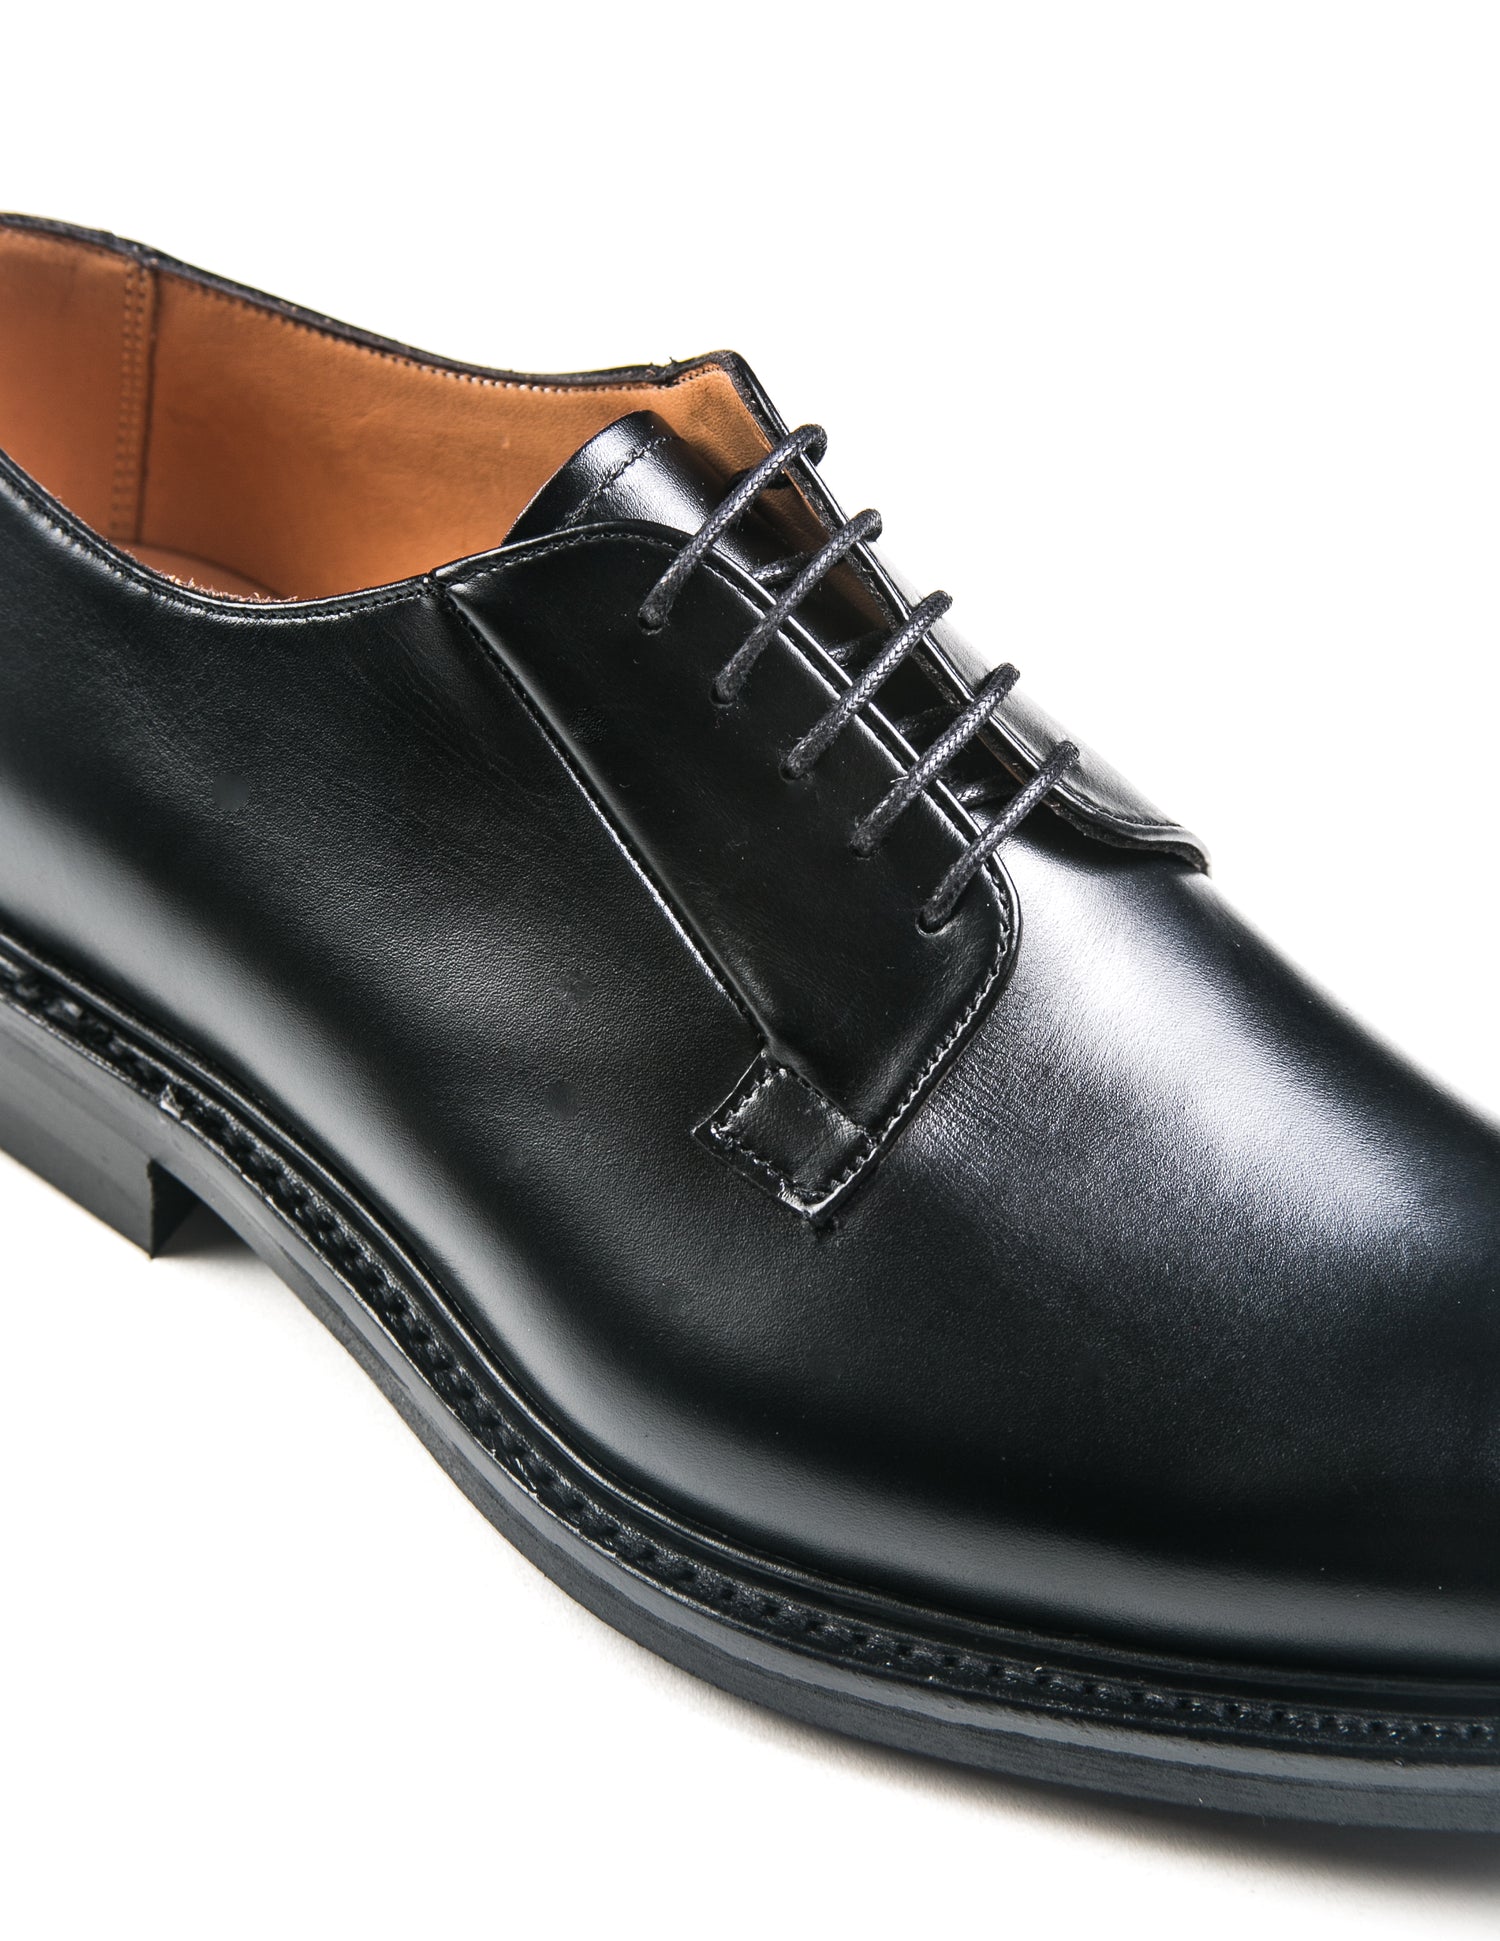 Side shot of Joseph Cheaney Deal II Derby in Black Calf Leather showing heel, laces, and interior